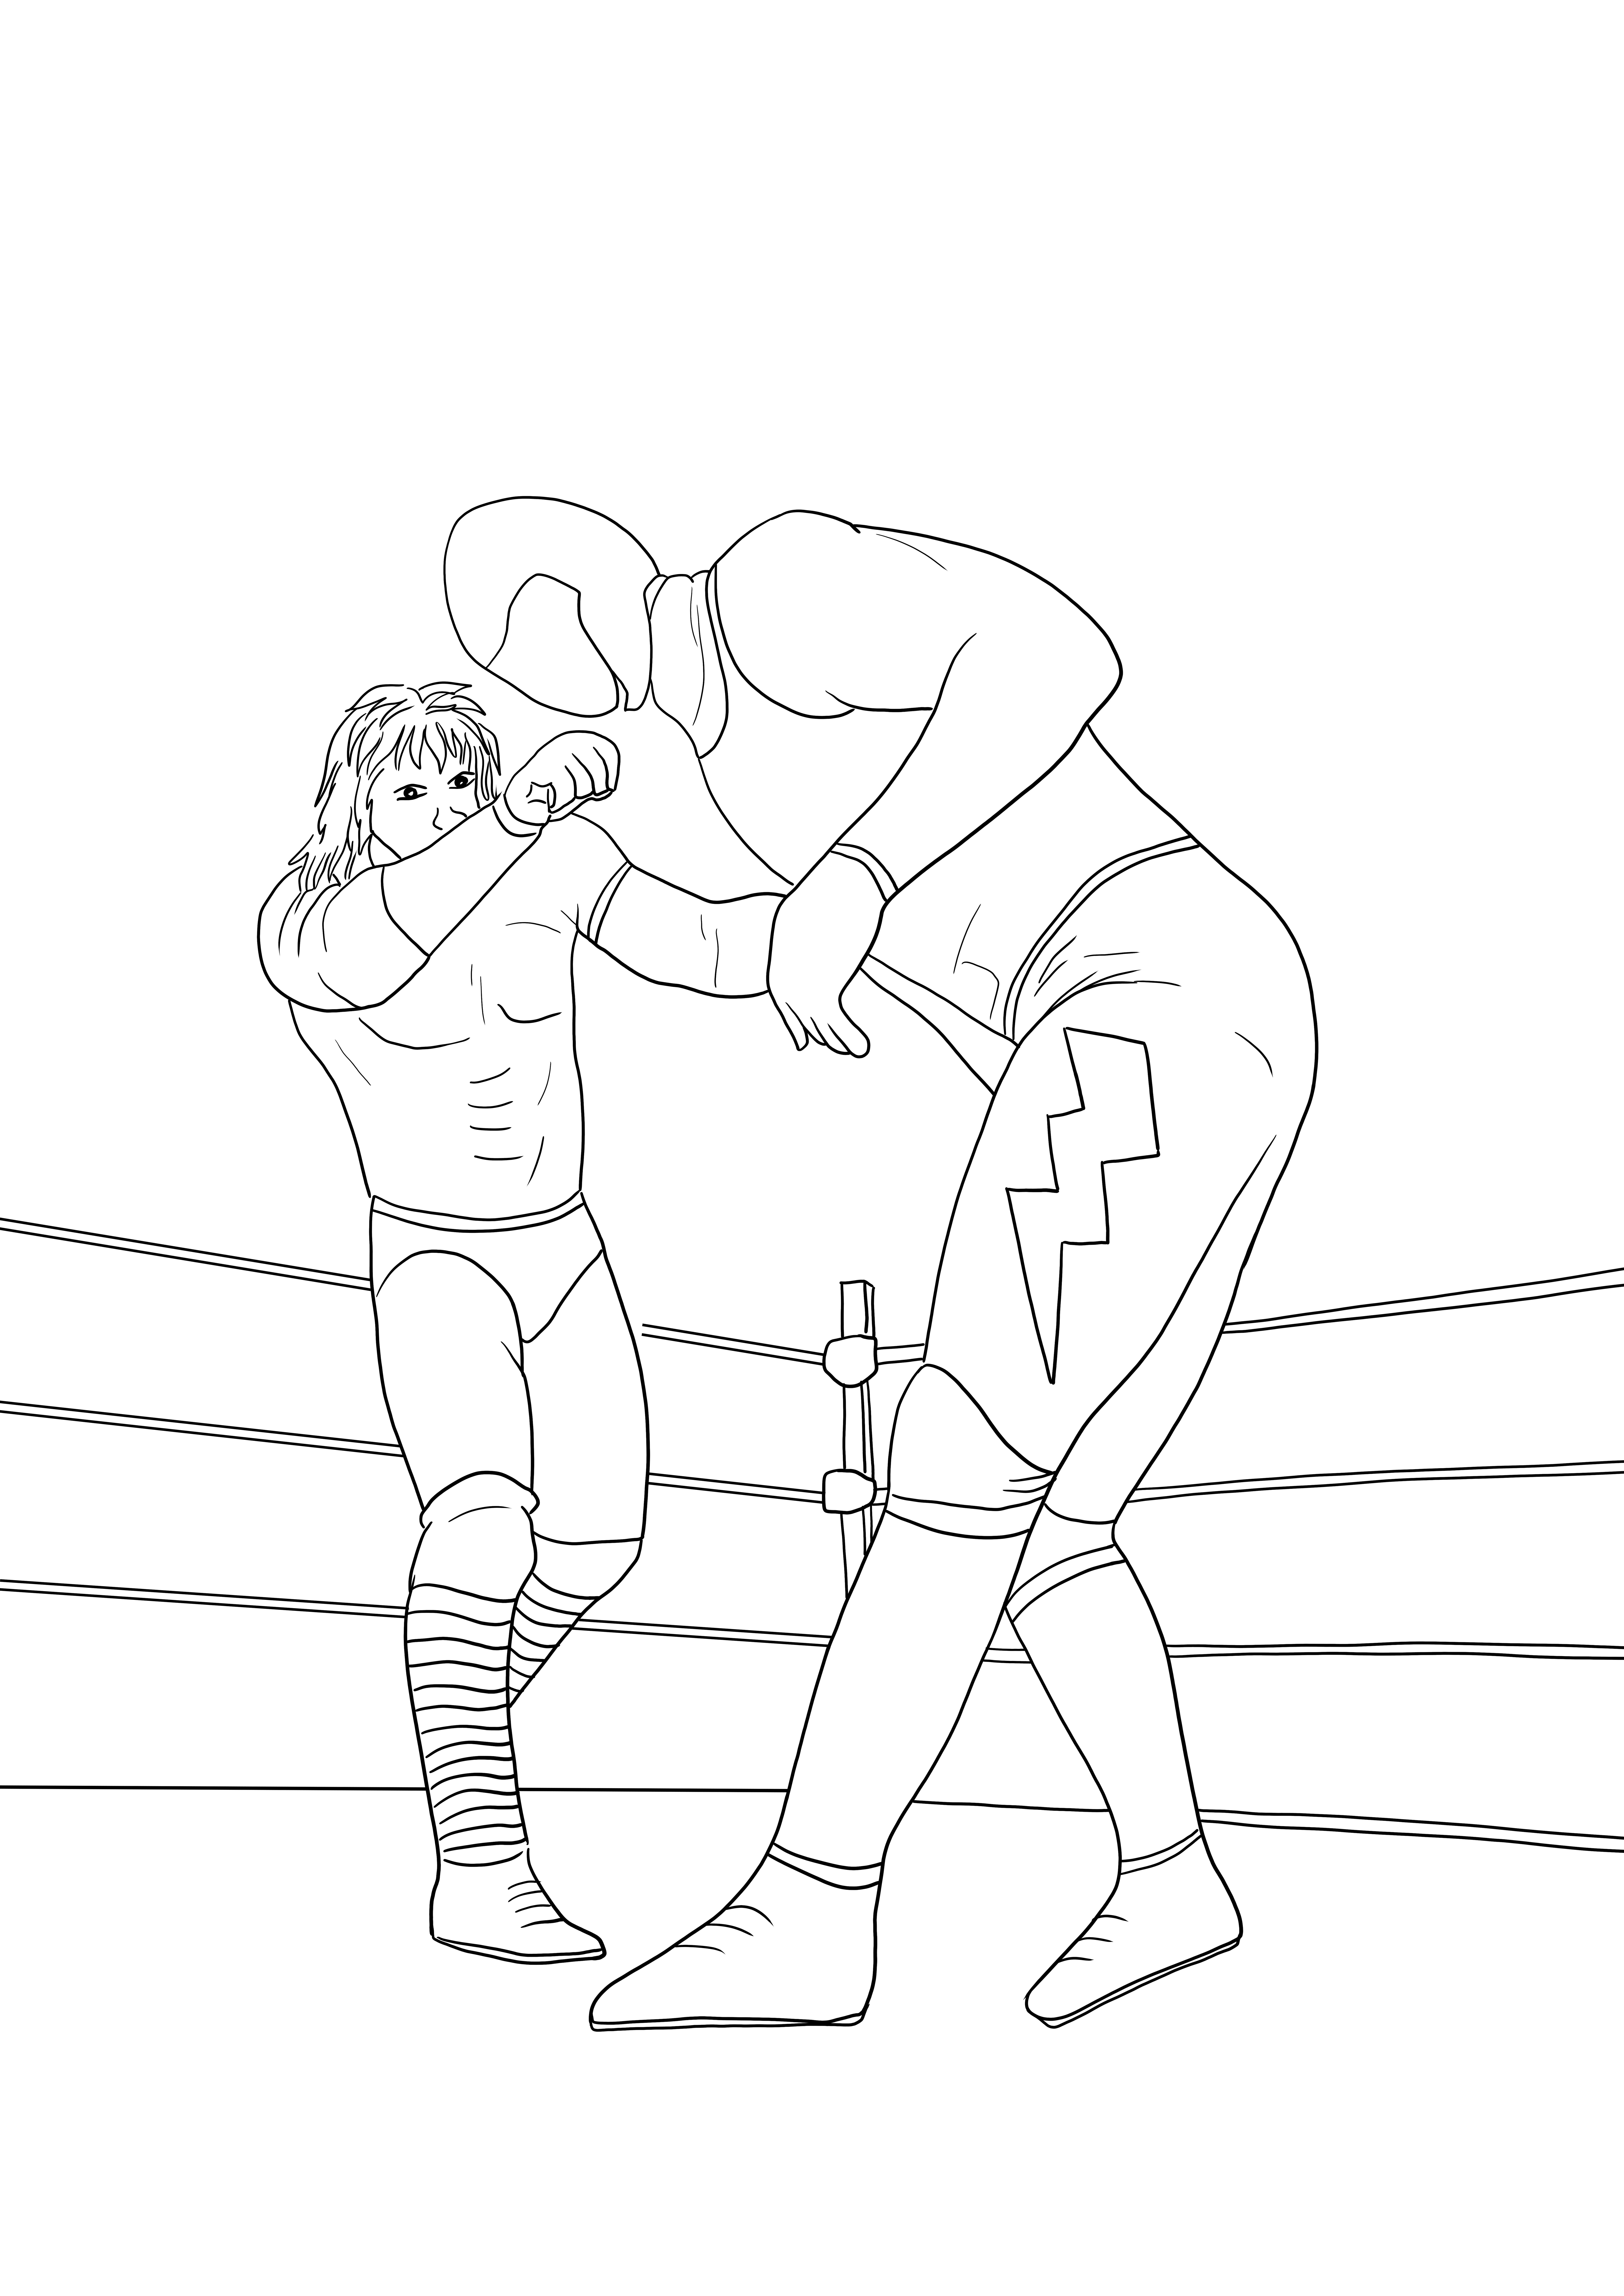 WWE wrestling on a ring free print and color image